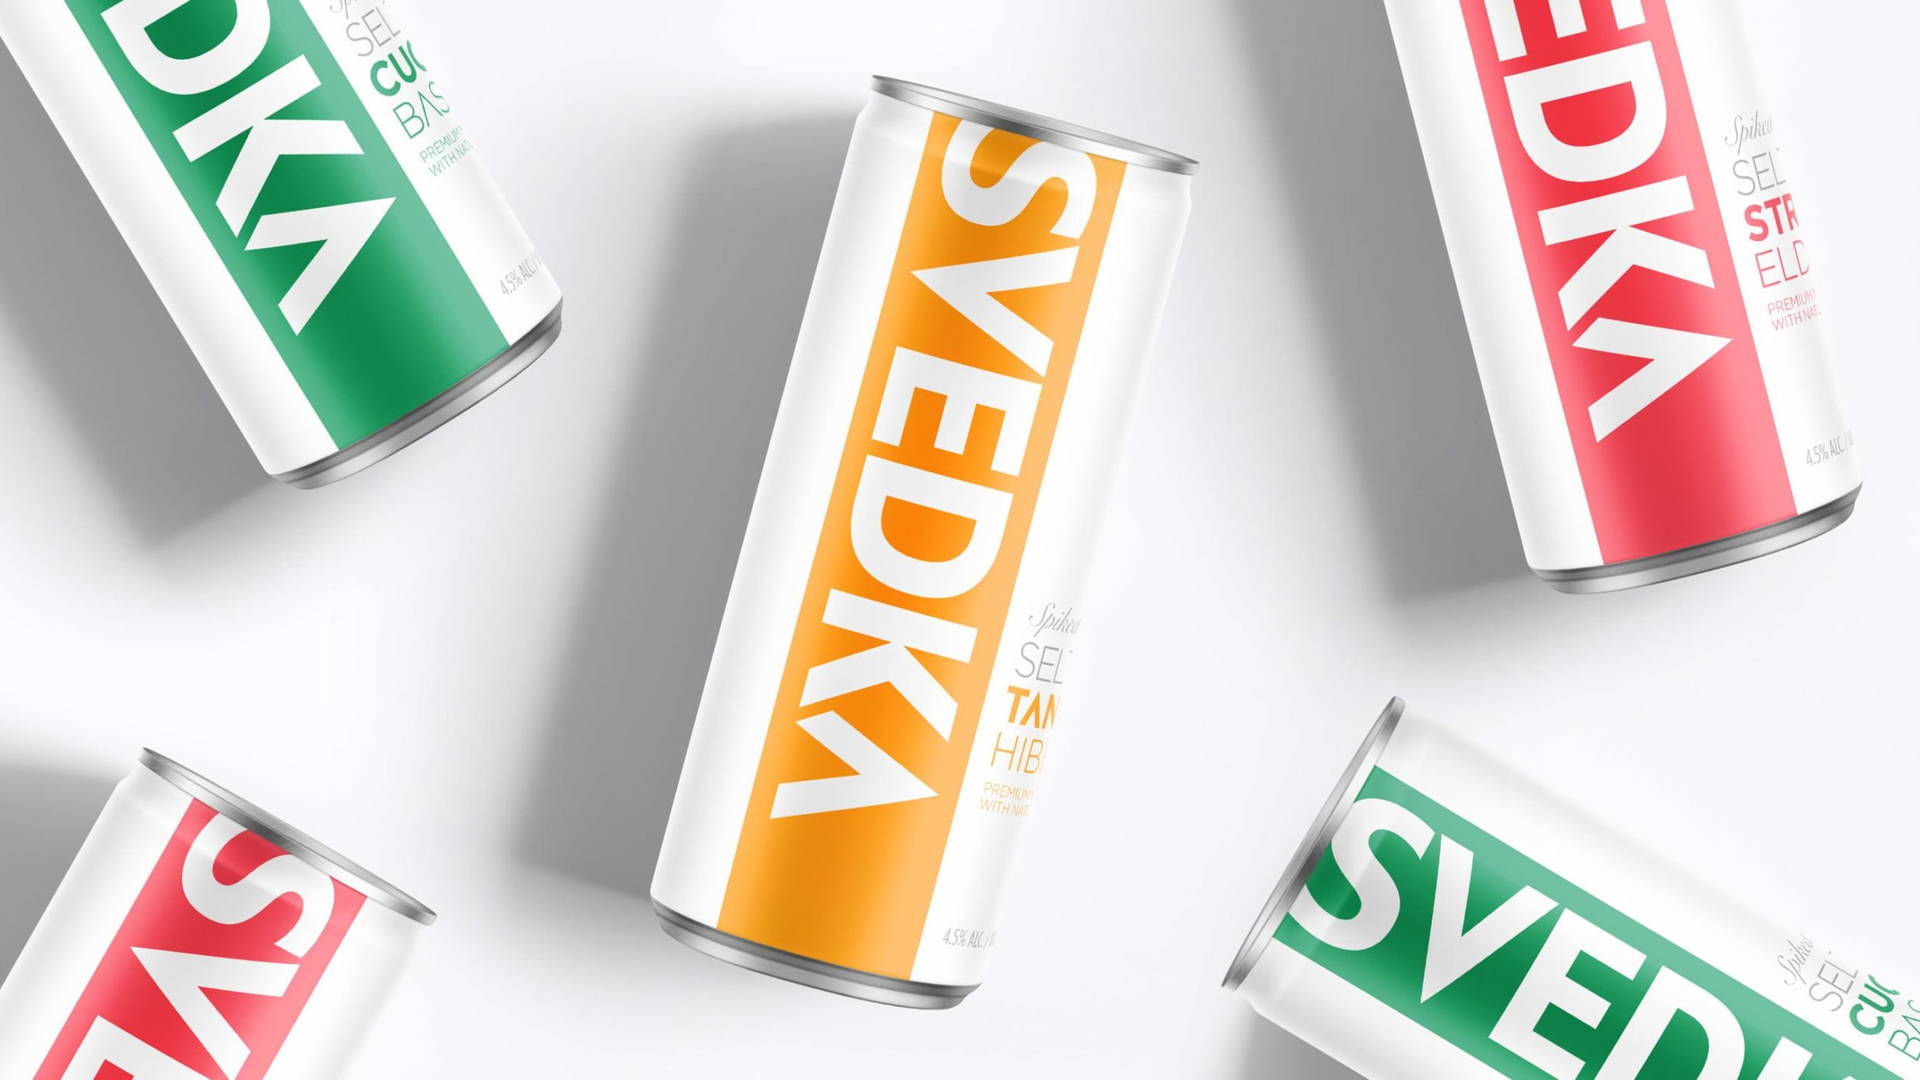 This Svedka Seltzer Makes A Splash In The Canned Cocktail Market